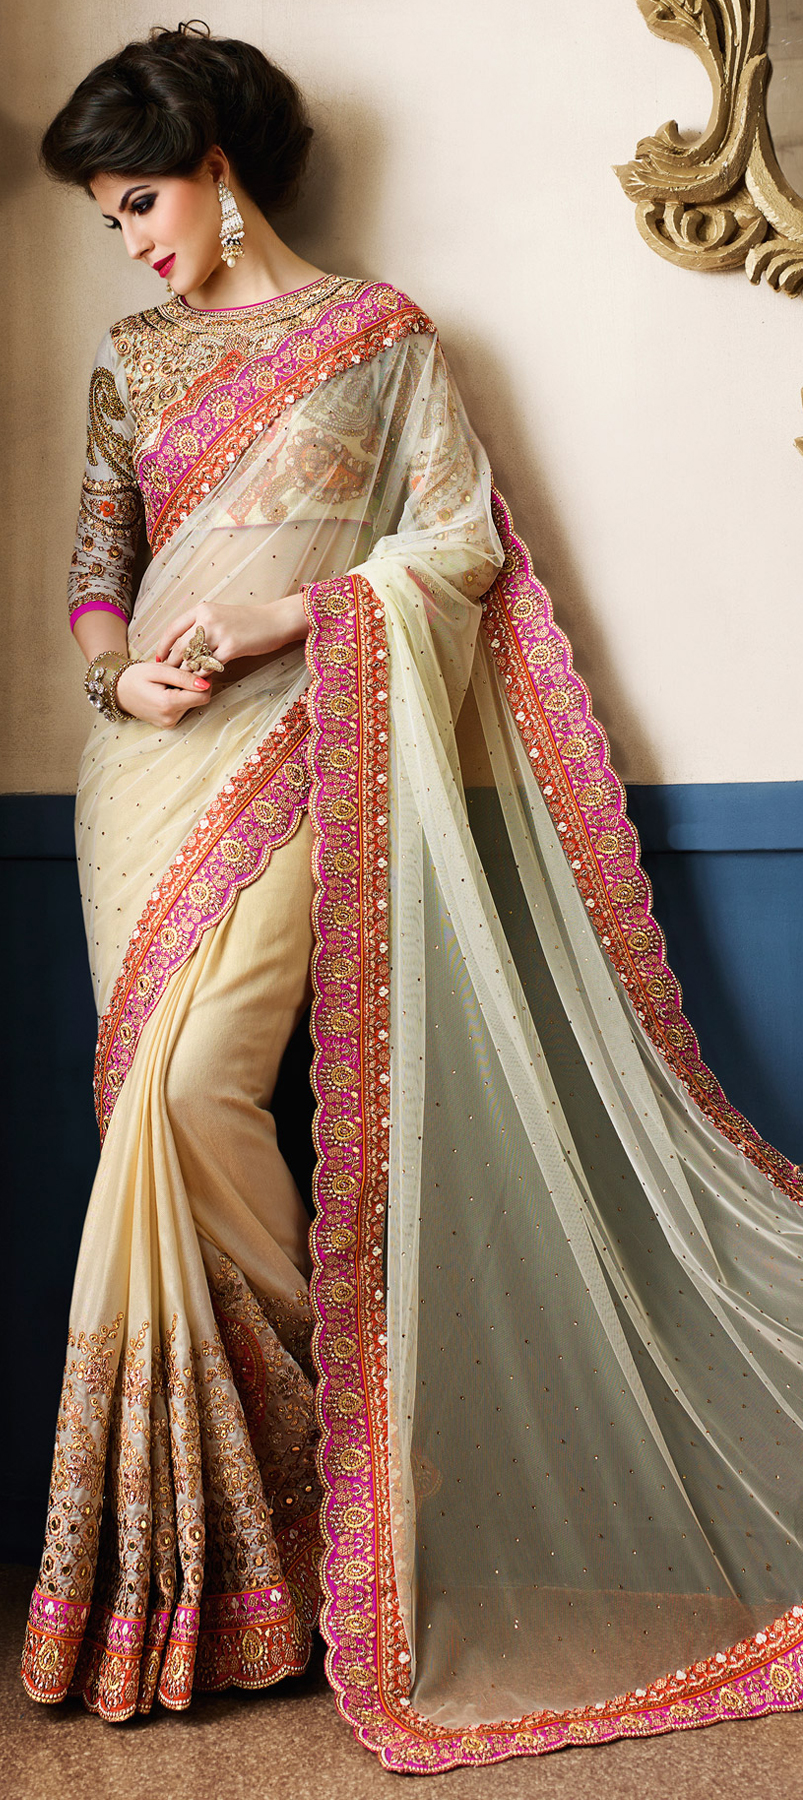 191019: Beige and Brown color family Bridal Wedding Sarees ...